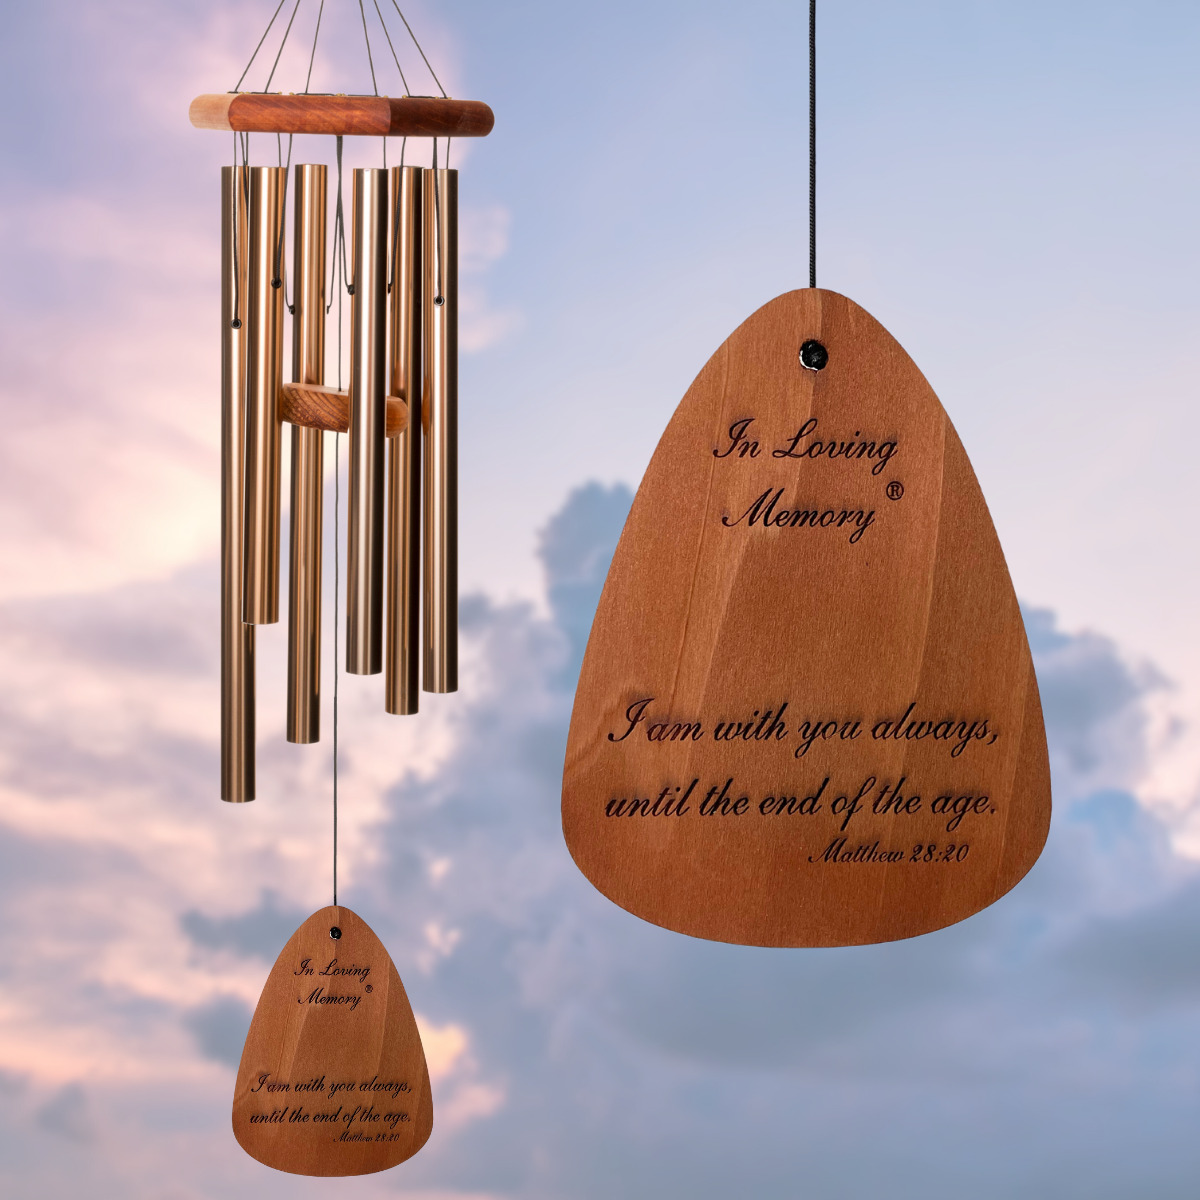 In Loving Memory 30 Inch Windchime - I am with you always - Bronze